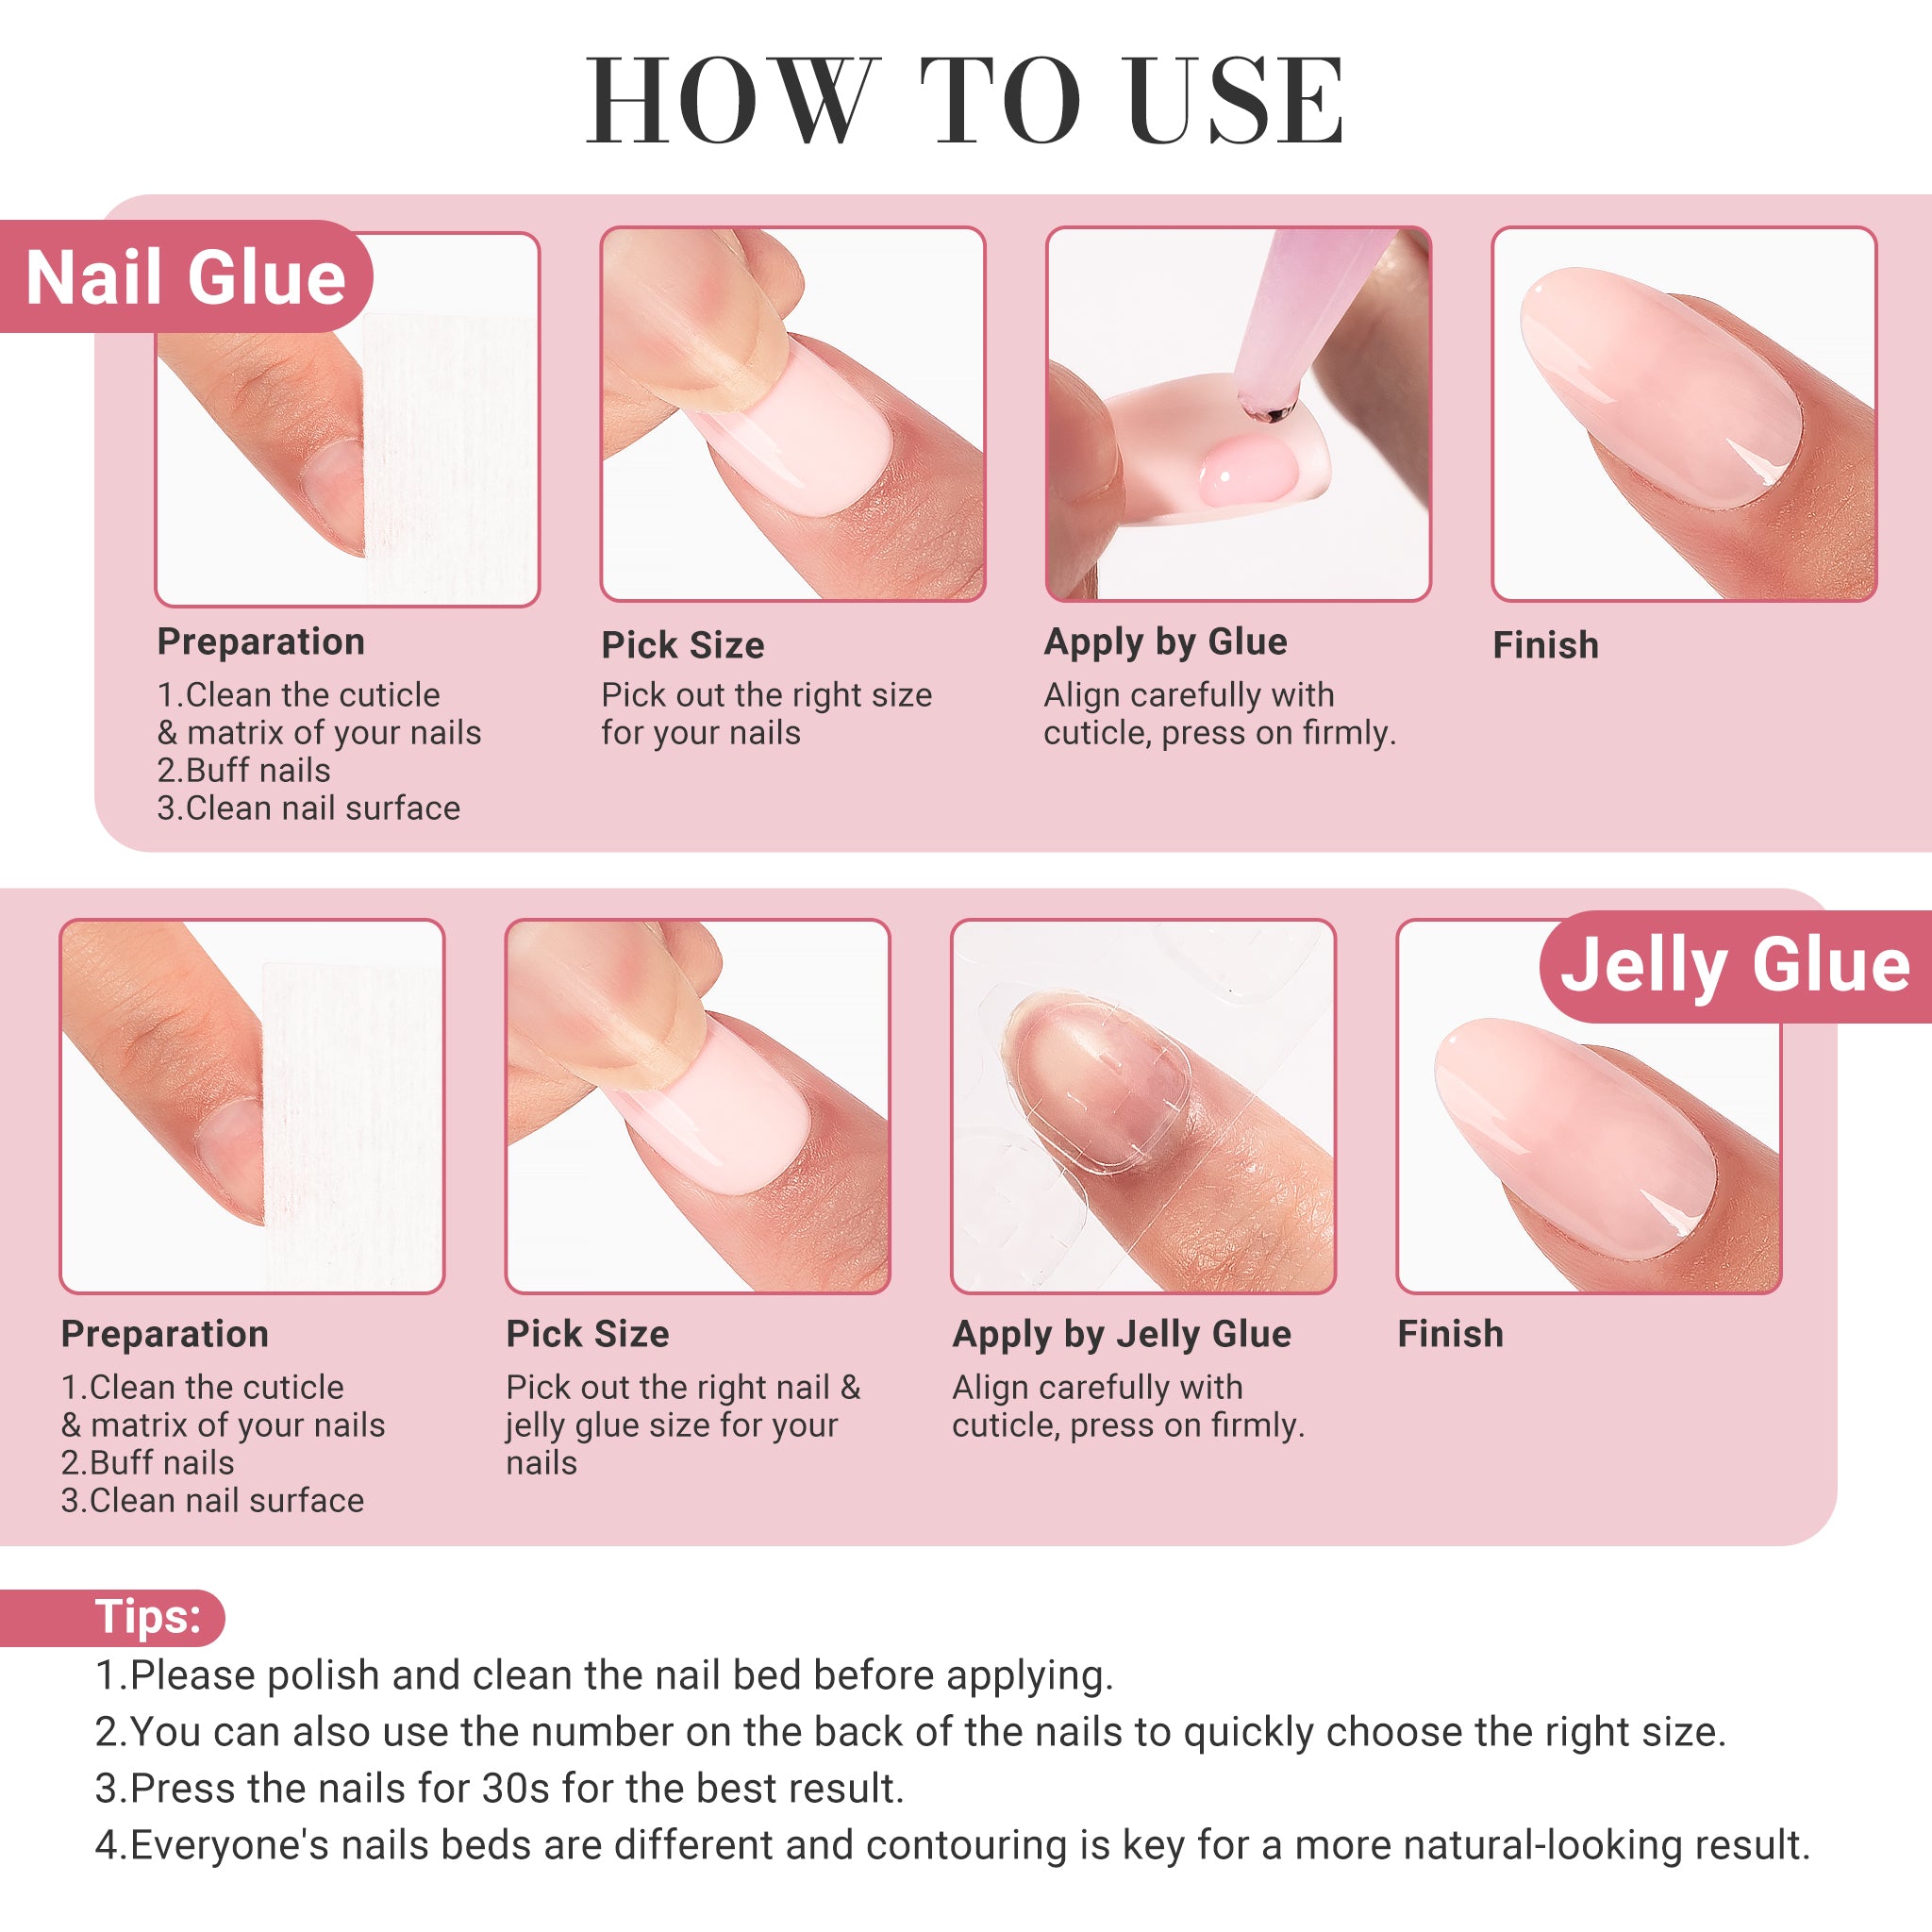 How To Use Press-on Nails